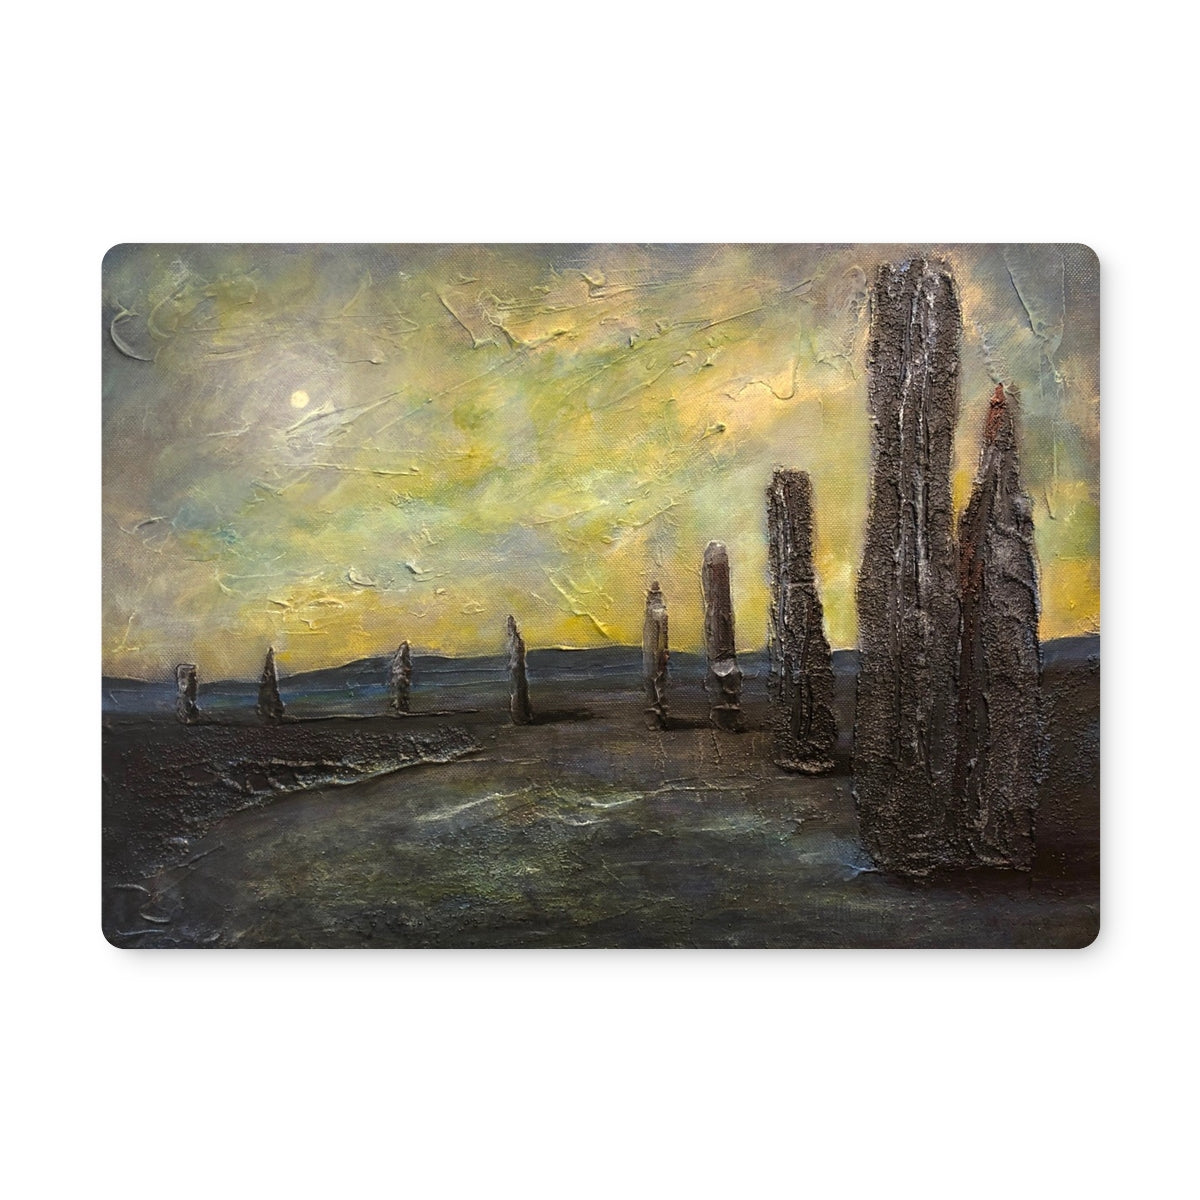 An Ethereal Ring Of Brodgar Art Gifts Placemat-Placemats-Orkney Art Gallery-4 Placemats-Paintings, Prints, Homeware, Art Gifts From Scotland By Scottish Artist Kevin Hunter